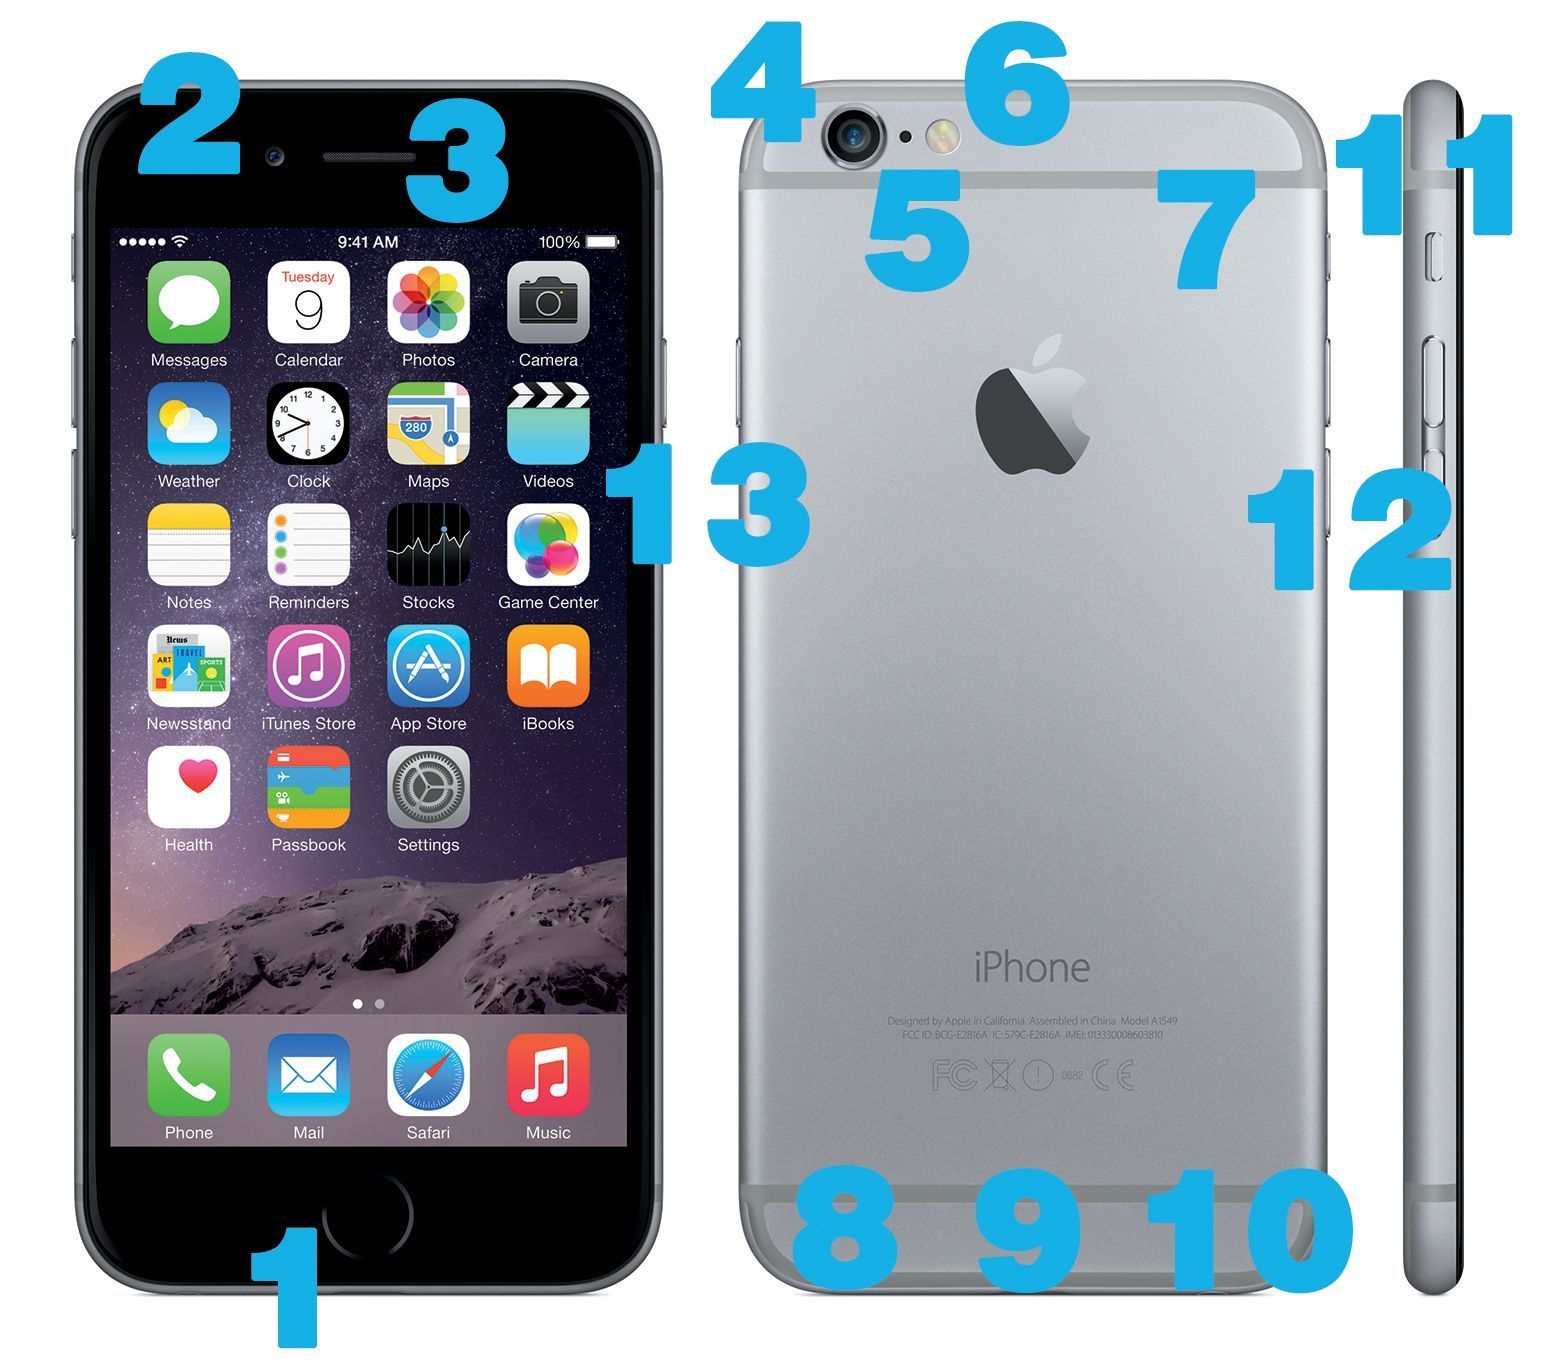 What Do the Buttons on the iPhone 6 Series Do?